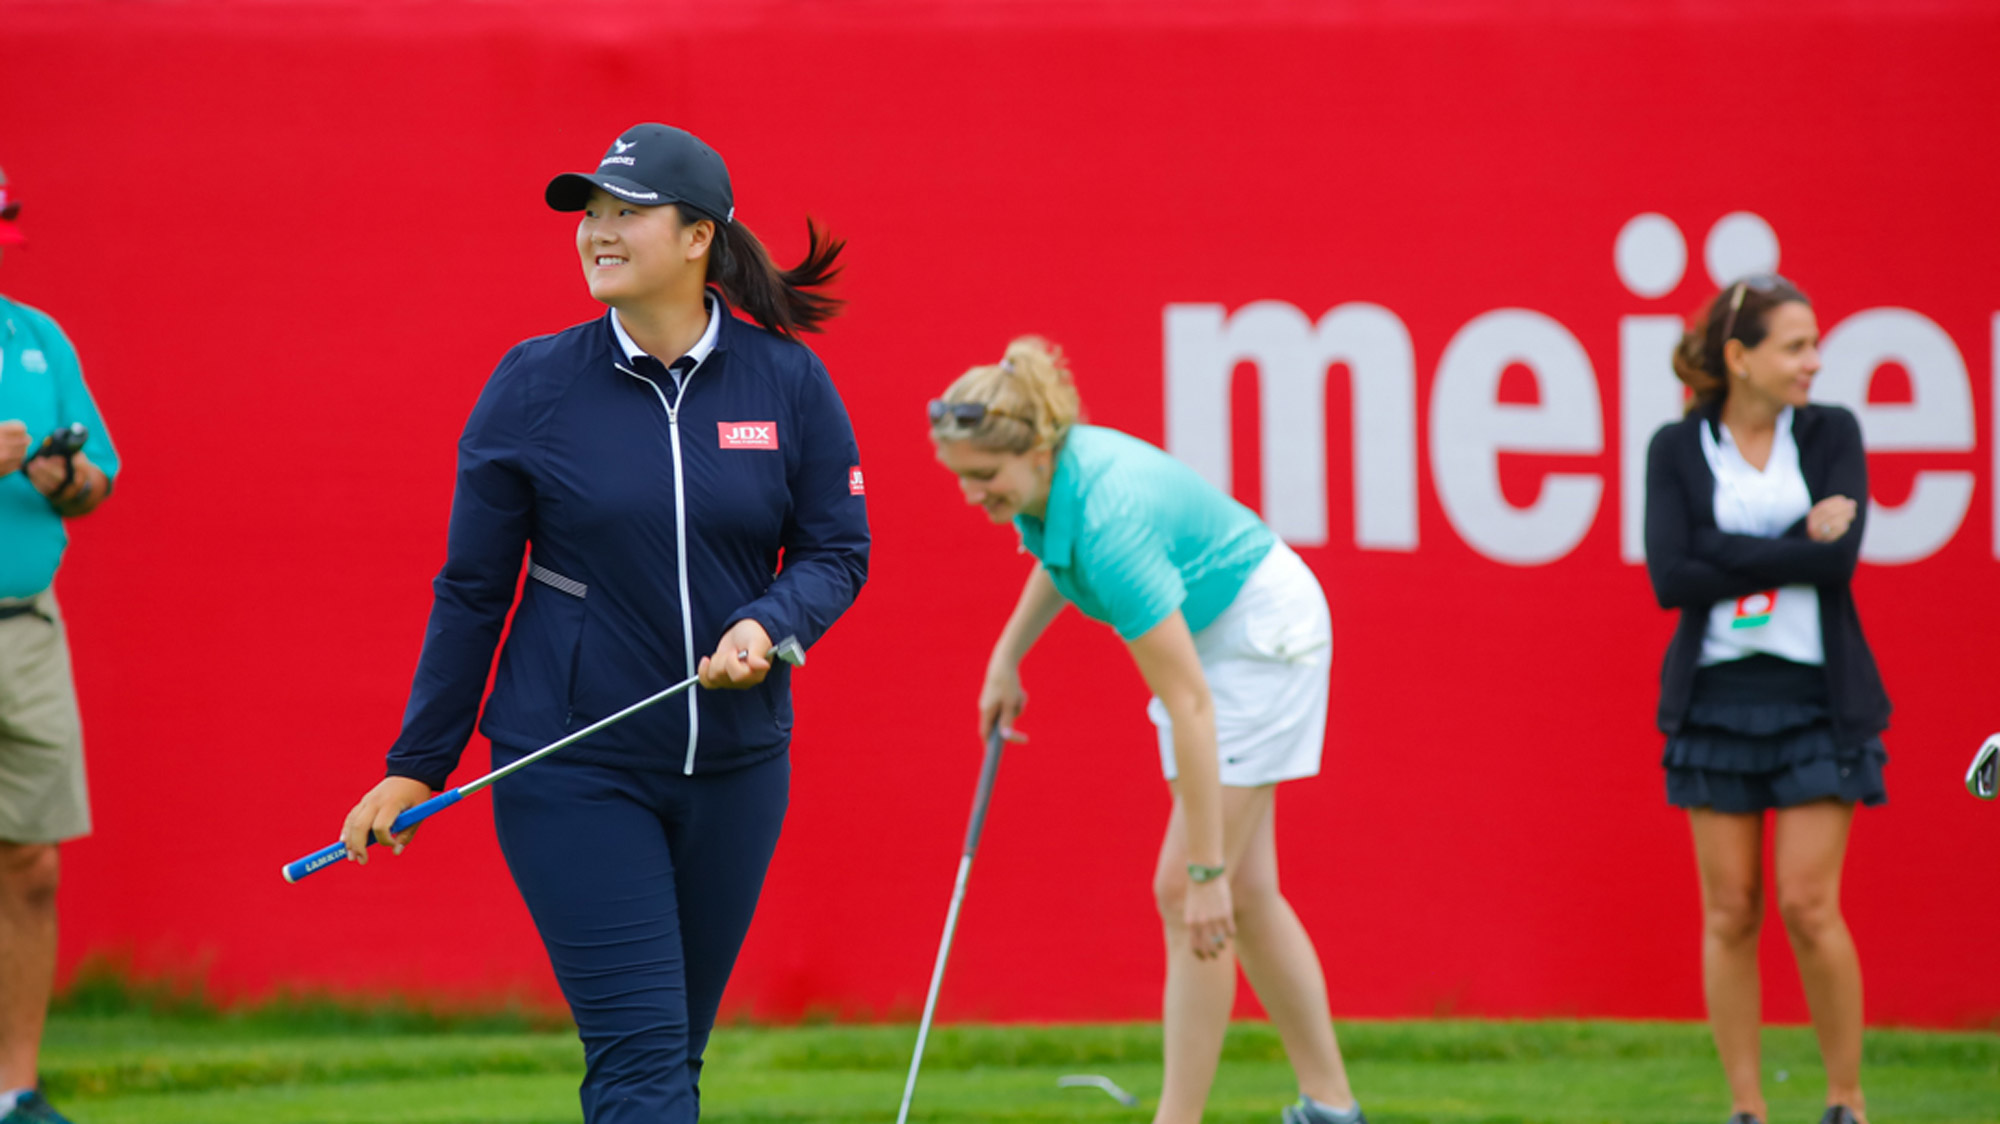 Angel Yin During the Pro-Am at the Meijer LPGA Classic